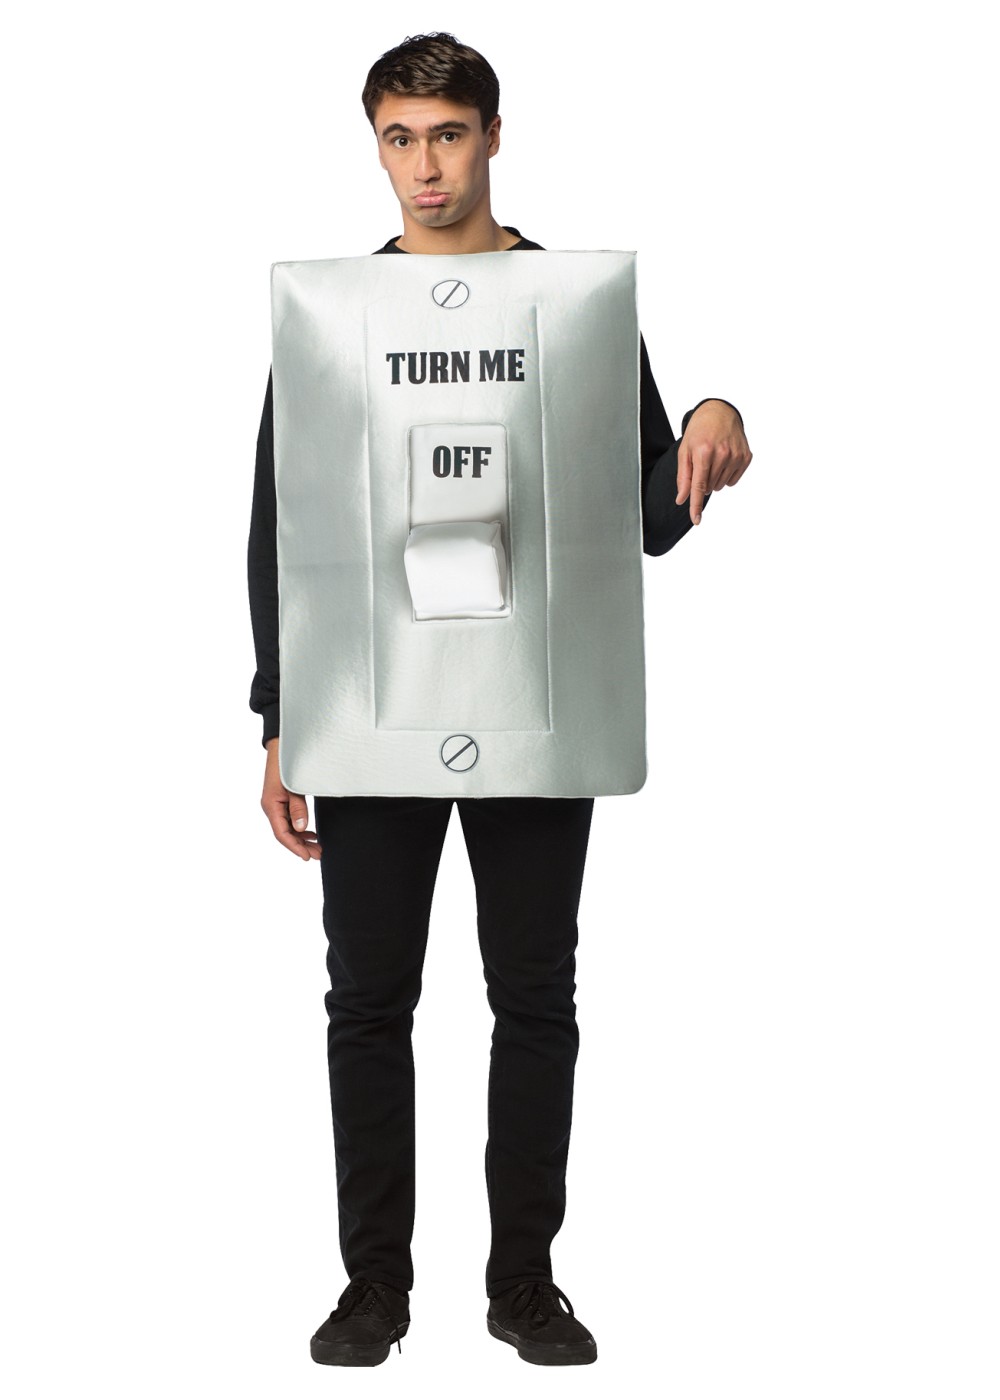 Turn Light Switch Costume Funny Costumes